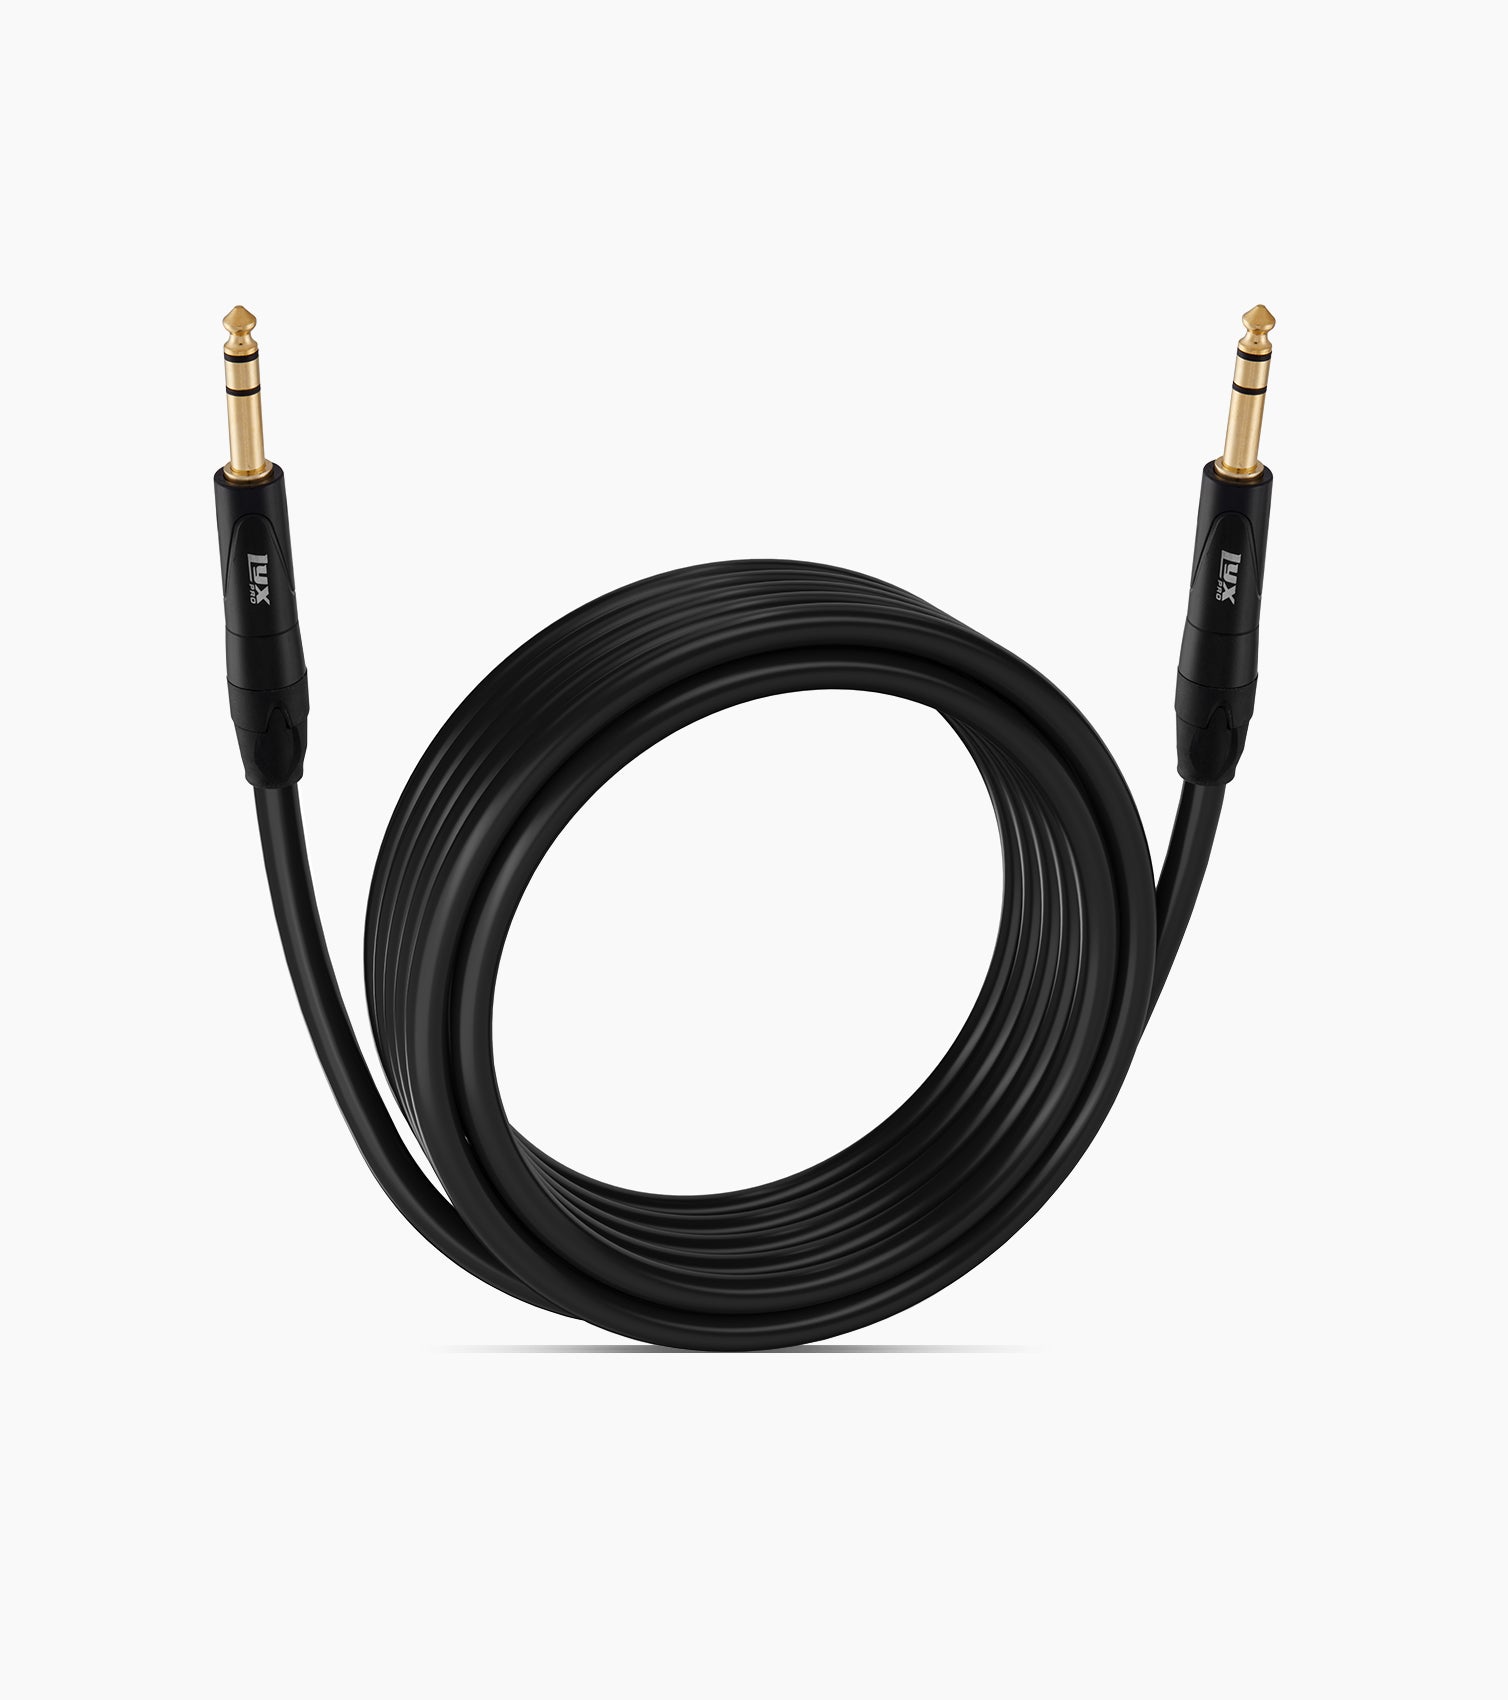 20 ft TRS audio cable